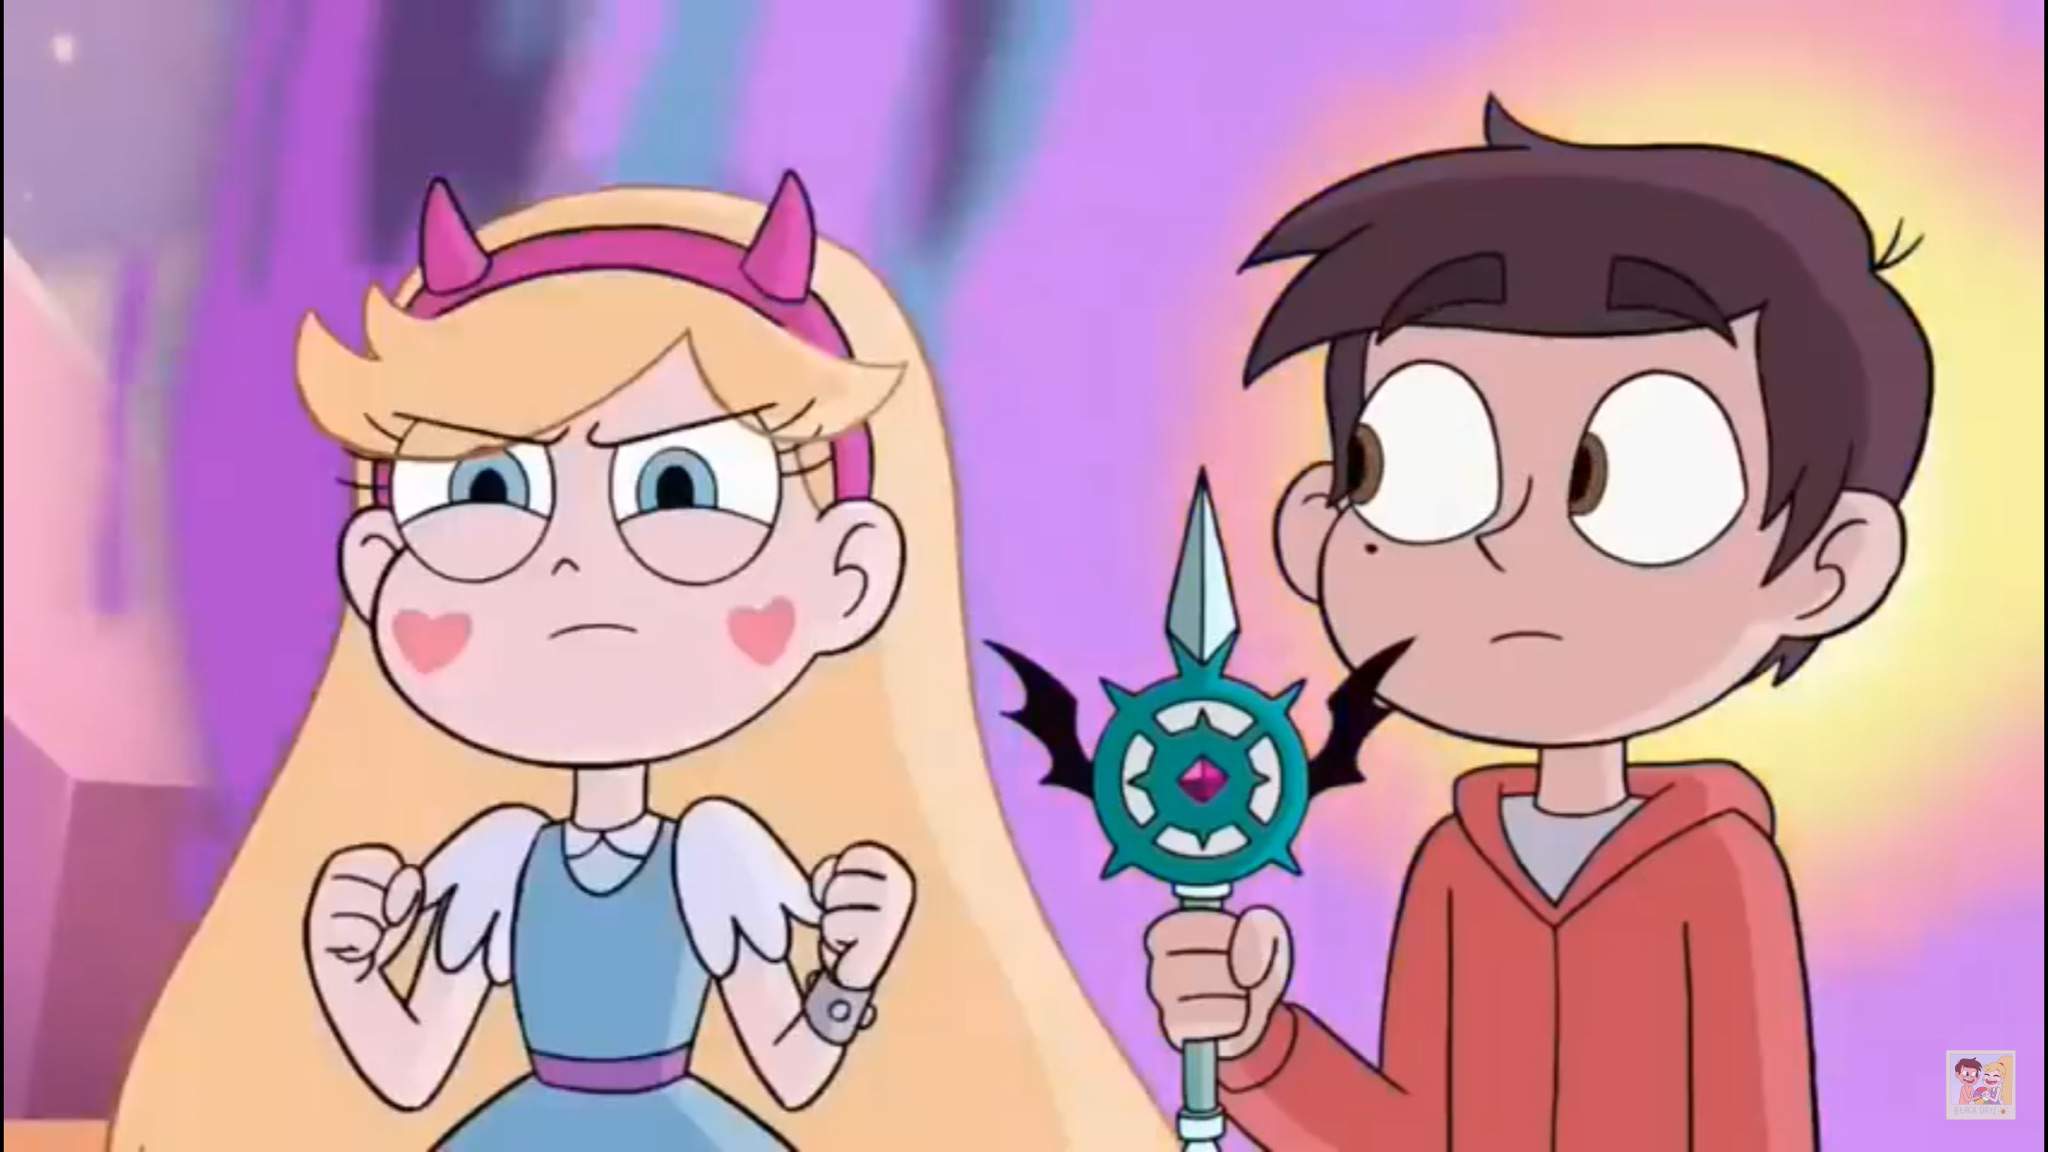 Star VS. The Forces of Evil - Genderbent Recolor by 